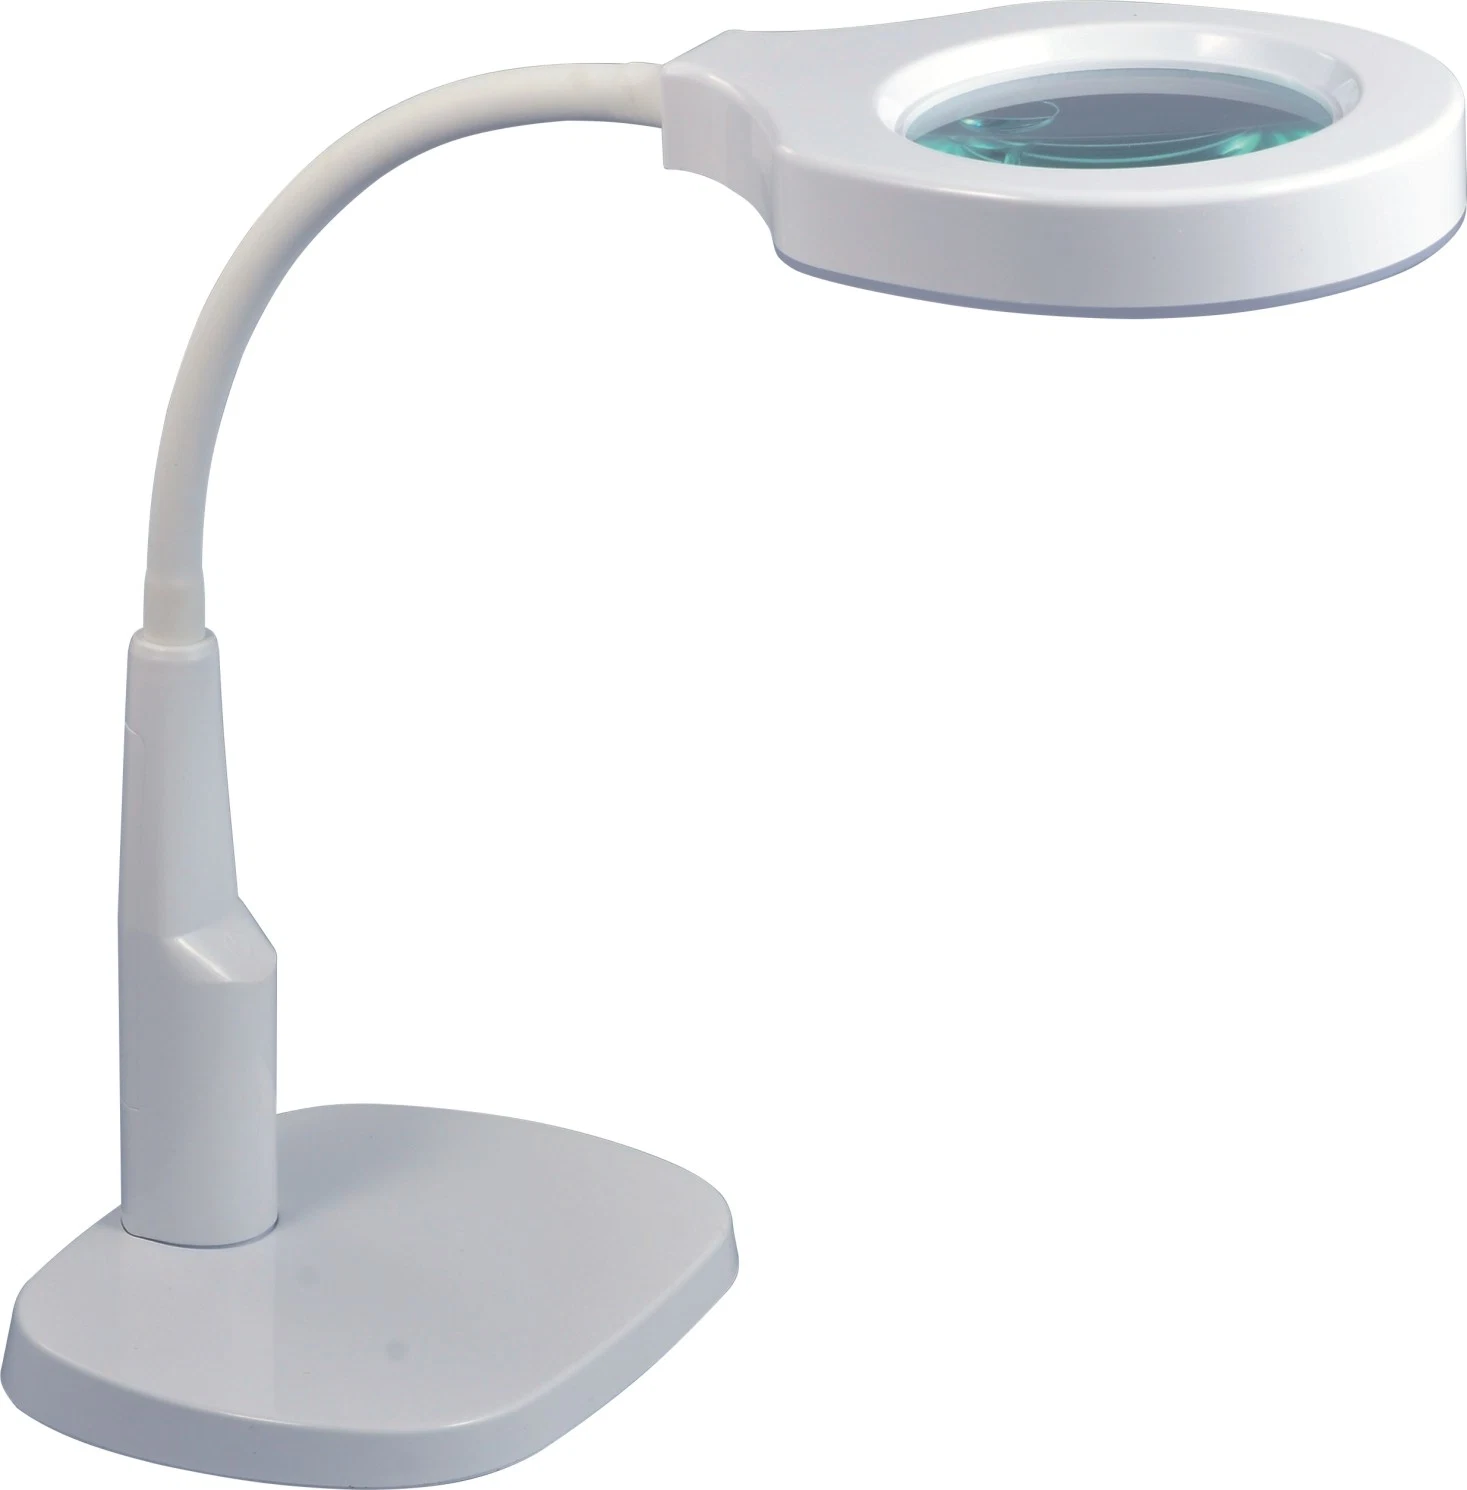 2 In1 Dimmable LED Table-Clamp Table Lamp Magnifier Working Inspection Magnifying Lamp